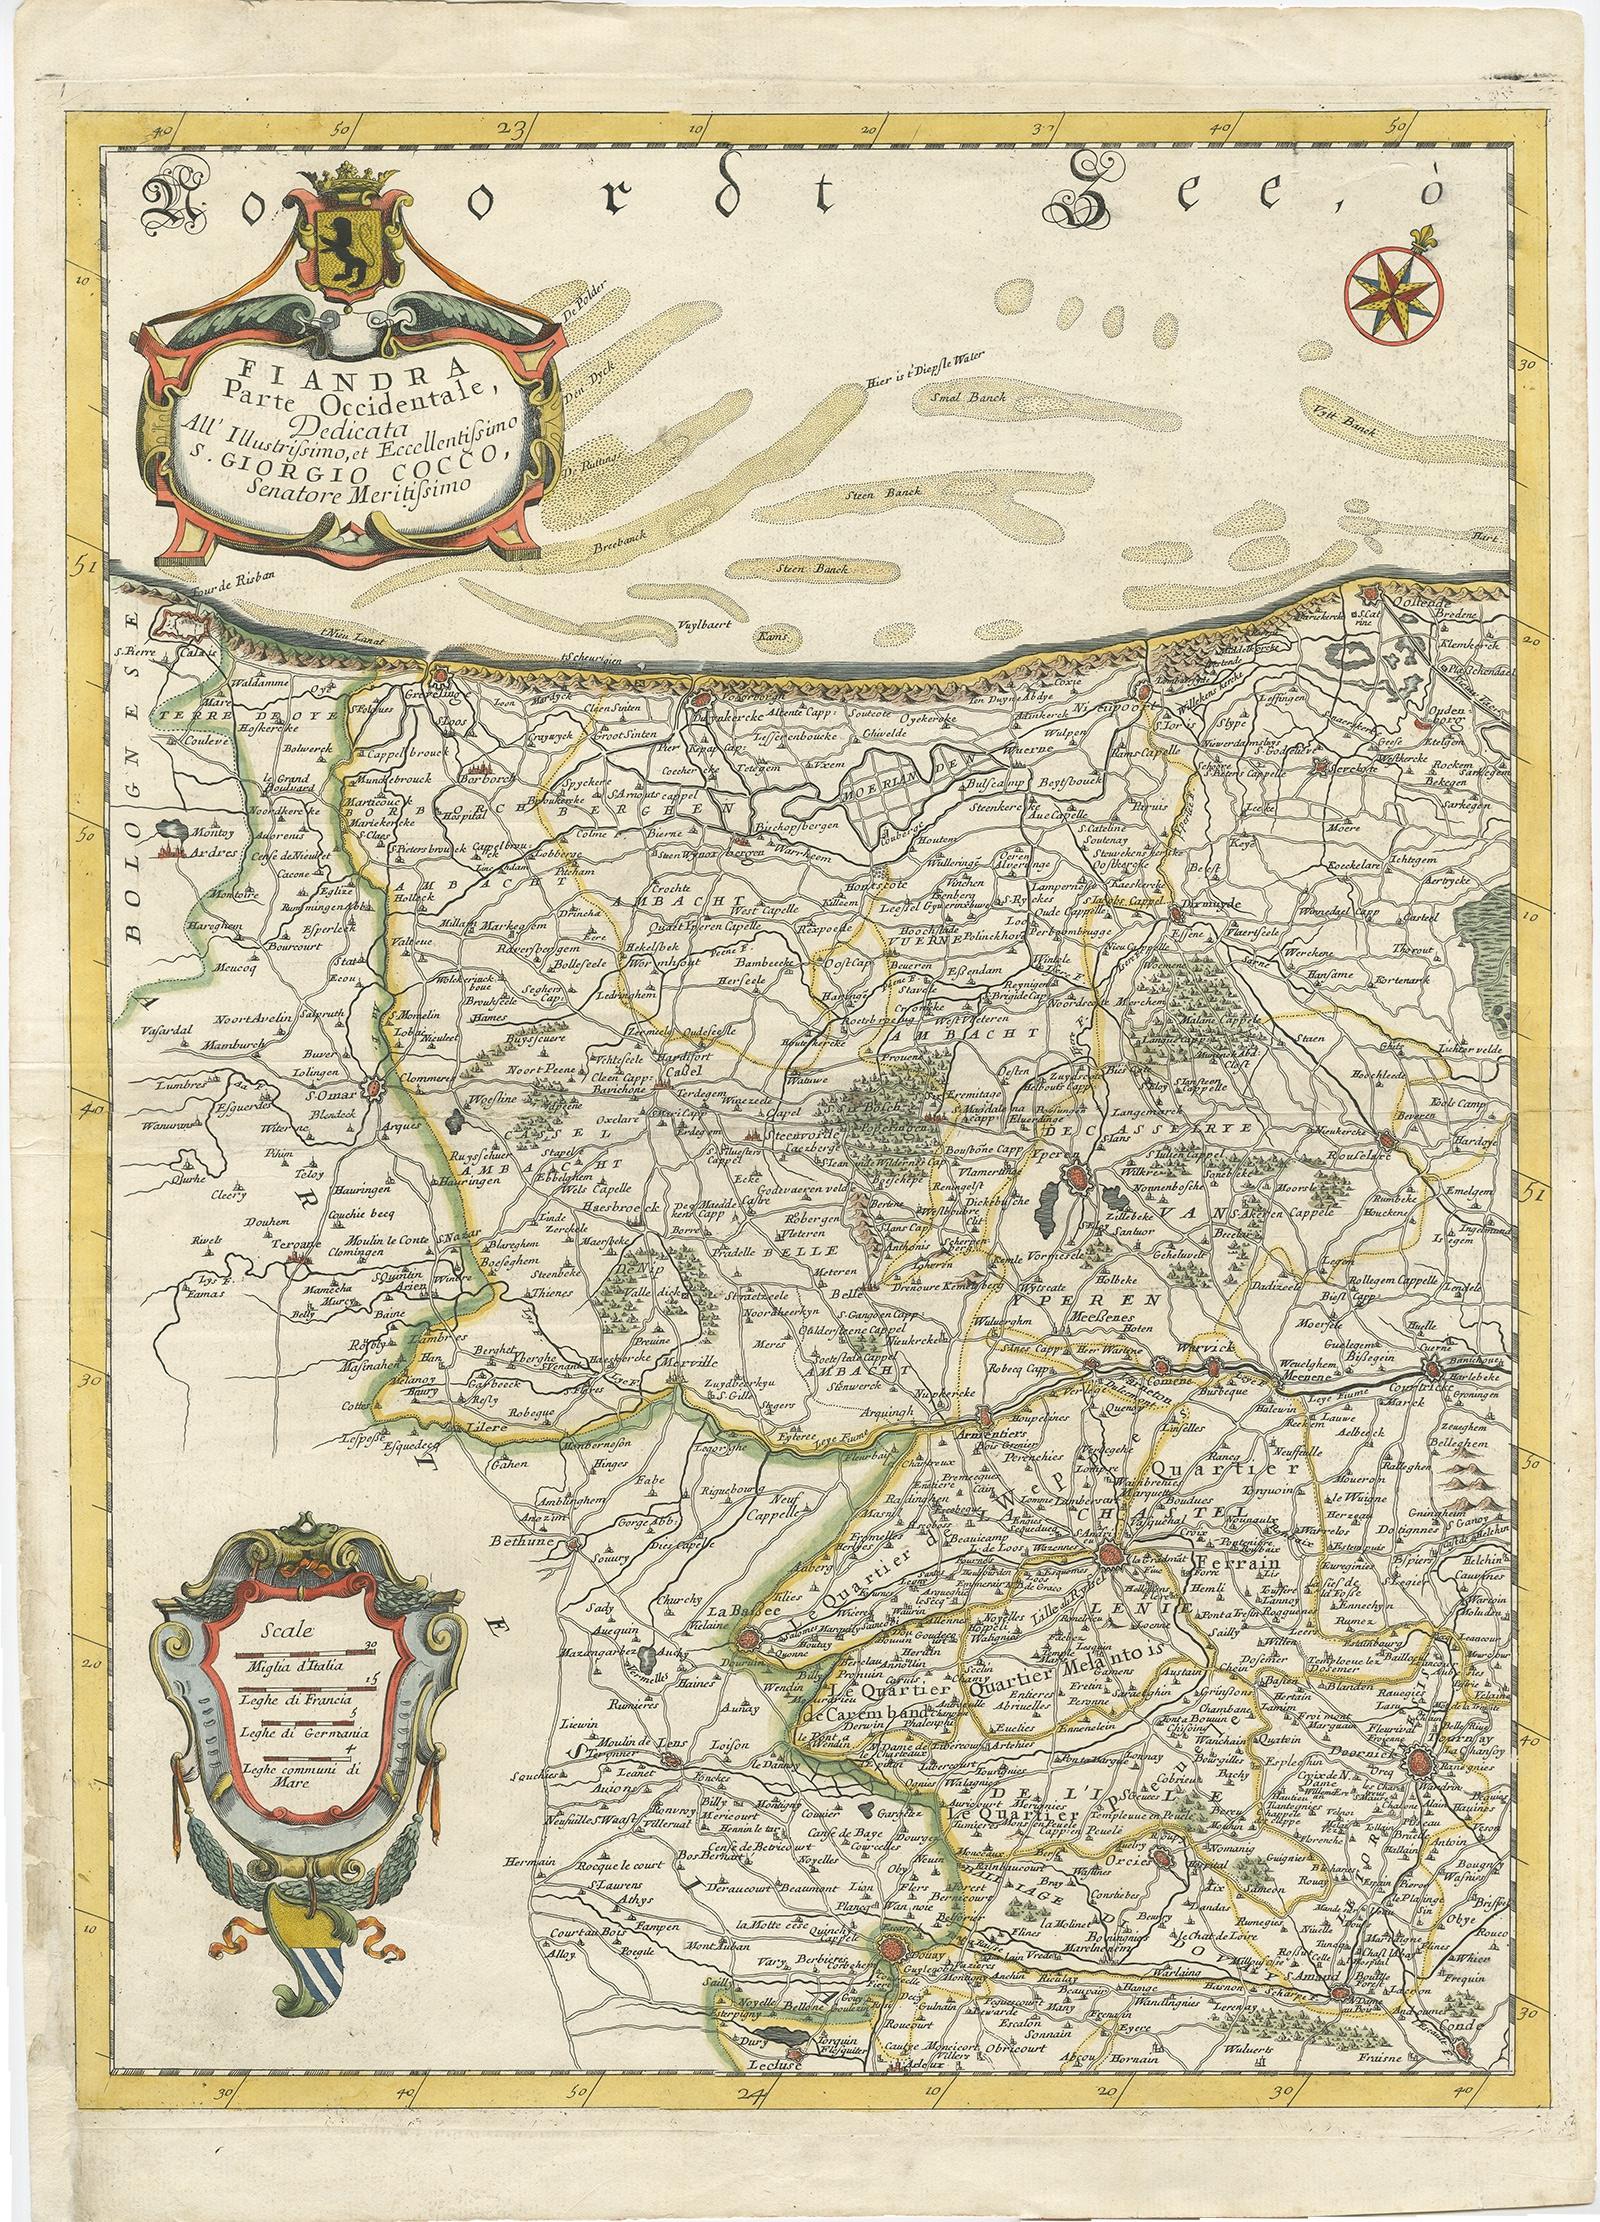 Antique map titled 'Fiandra Parte Occidentale (..)'. 

Depicts northern part of Flanders, from North Sea, extends through the northern region of France to the cities of Douai and Vieux-Conde located at the bottom of the map. Originates from